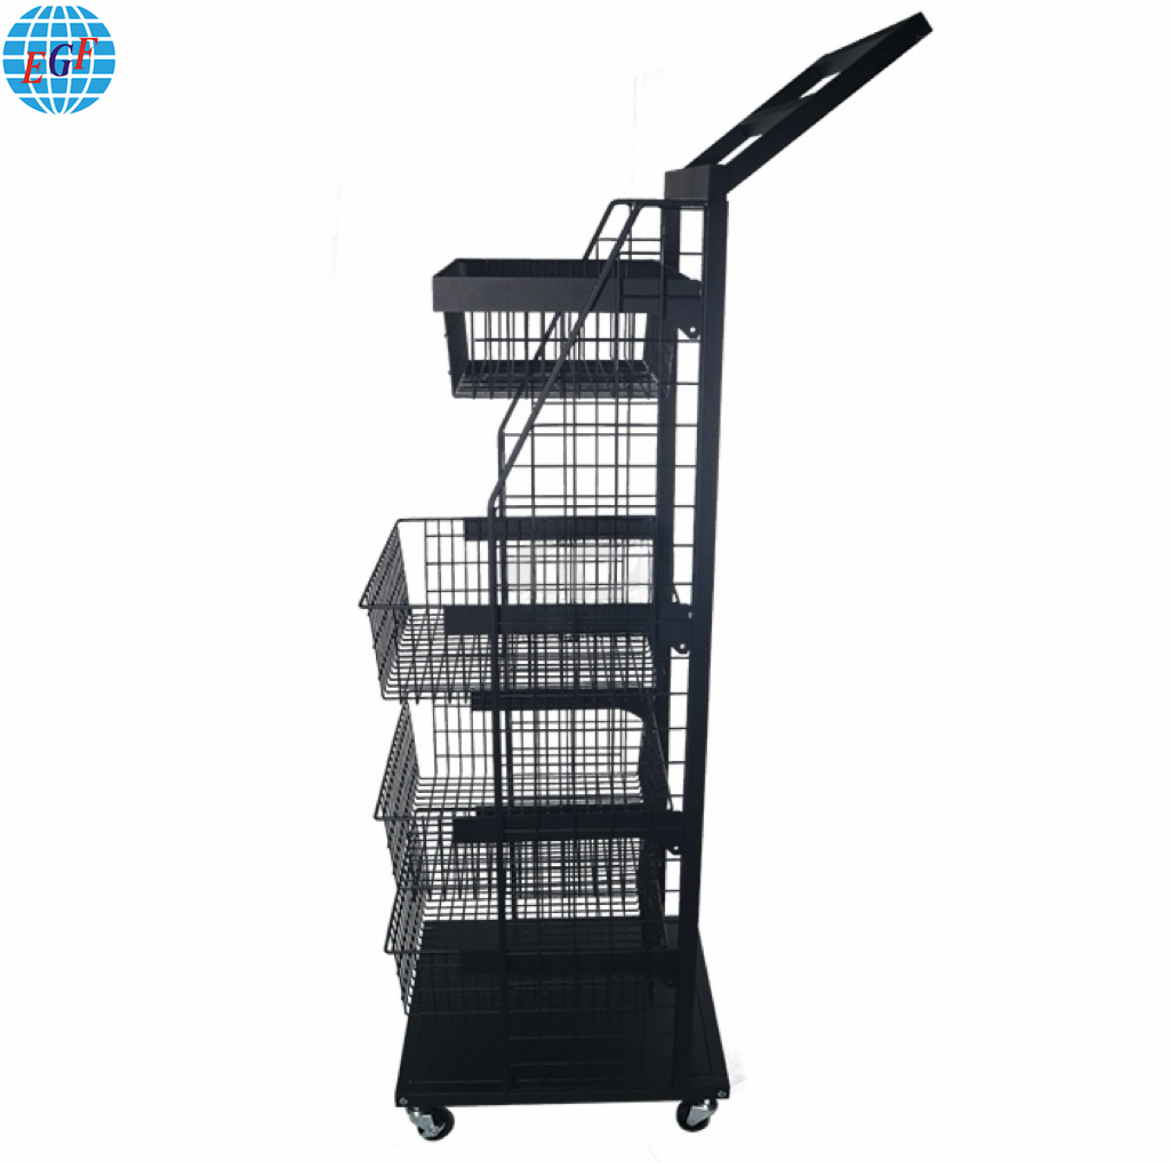 4-Tier Black Matte Powder Coated Steel Wire Storage Basket Rack with Locking Casters - Home & Commercial Use